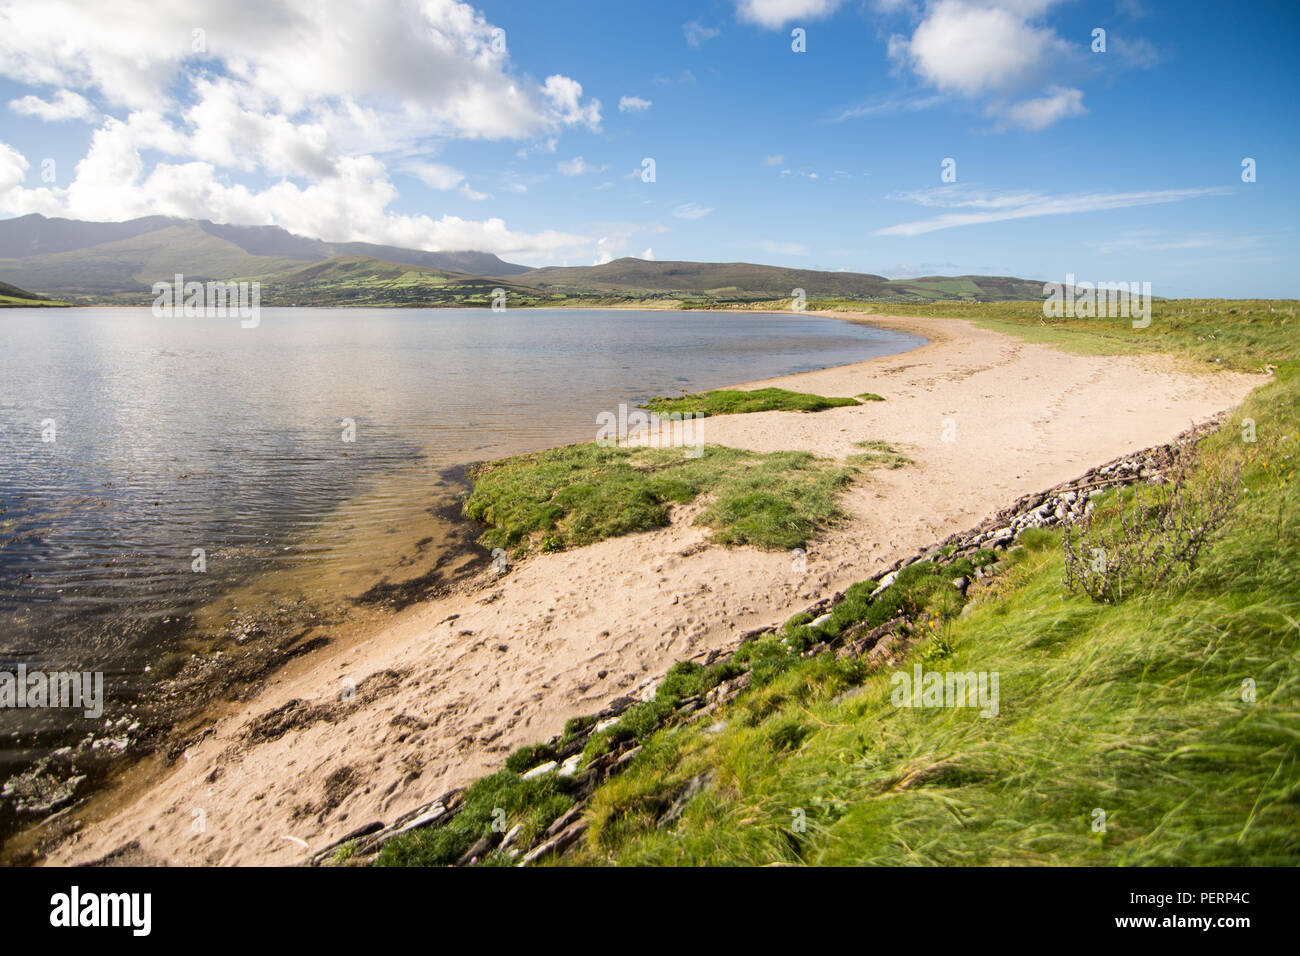 The sandy shores of the Cloghane Estuary beside Brandon Bay on the Dingle Peninsula, with Brandon Mountain rising behind, in the west of Ireland's Cou Stock Photo